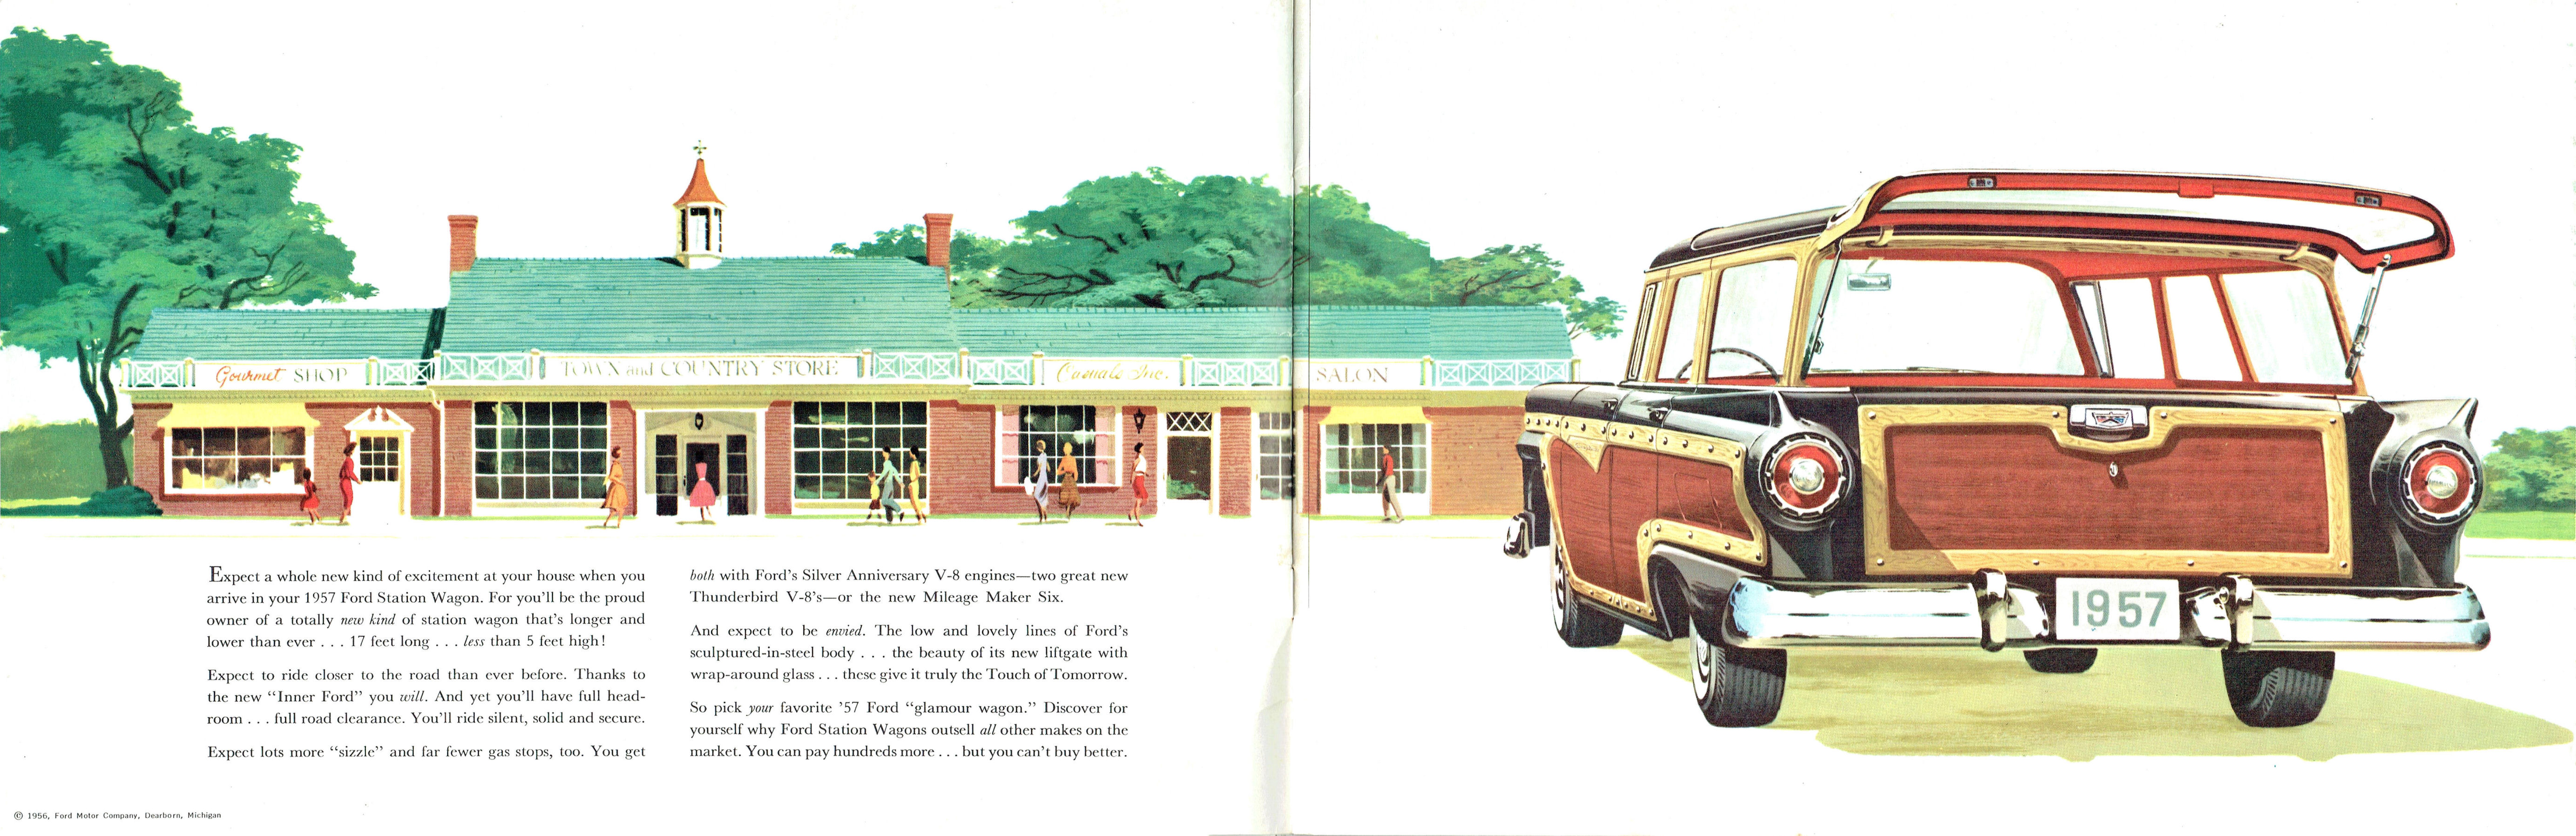 1957_Ford_Station_Wagons-02-05